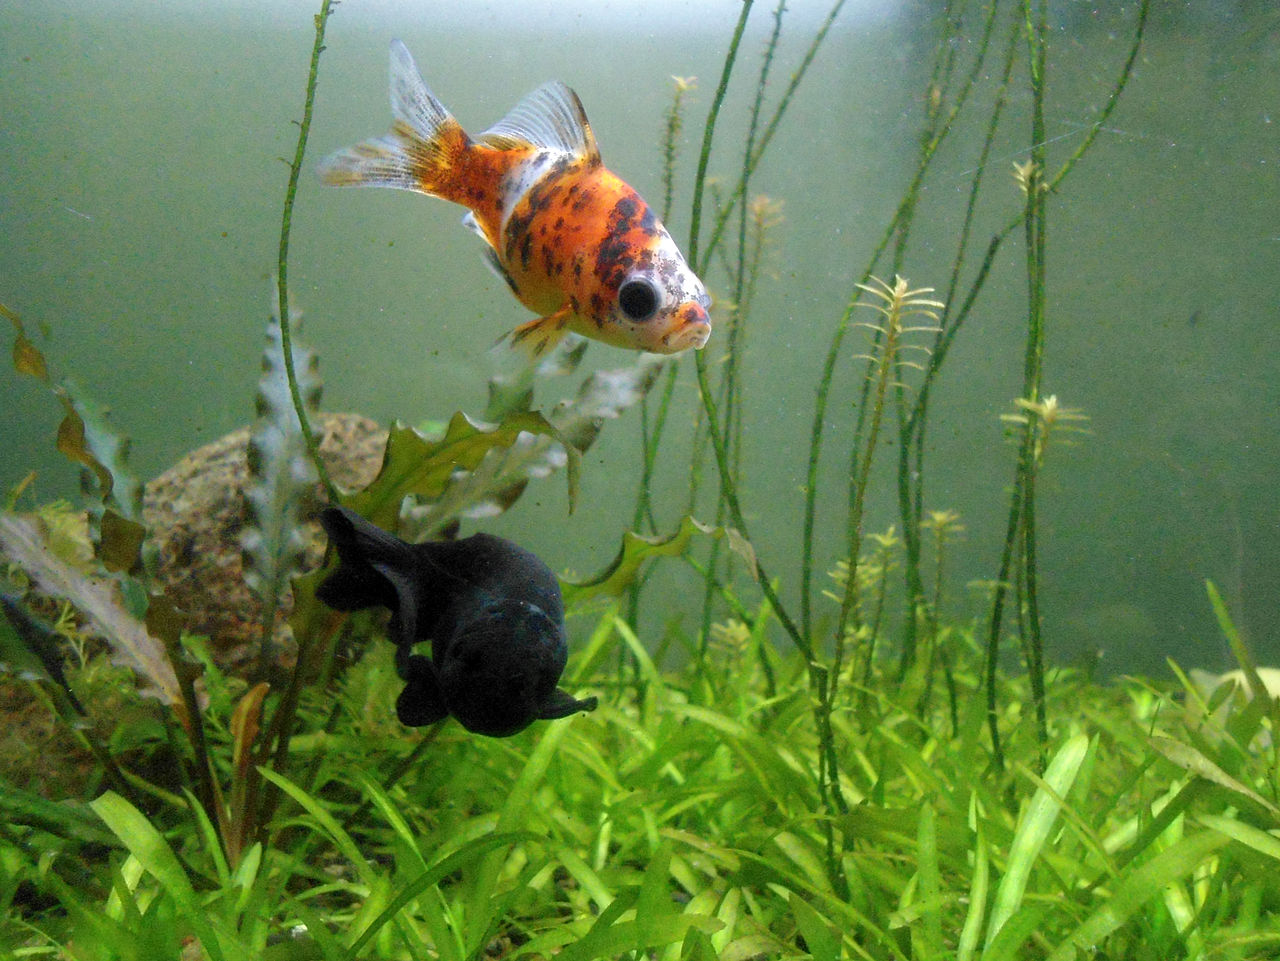 Showing two goldfish one is completely black while the other has black spots.